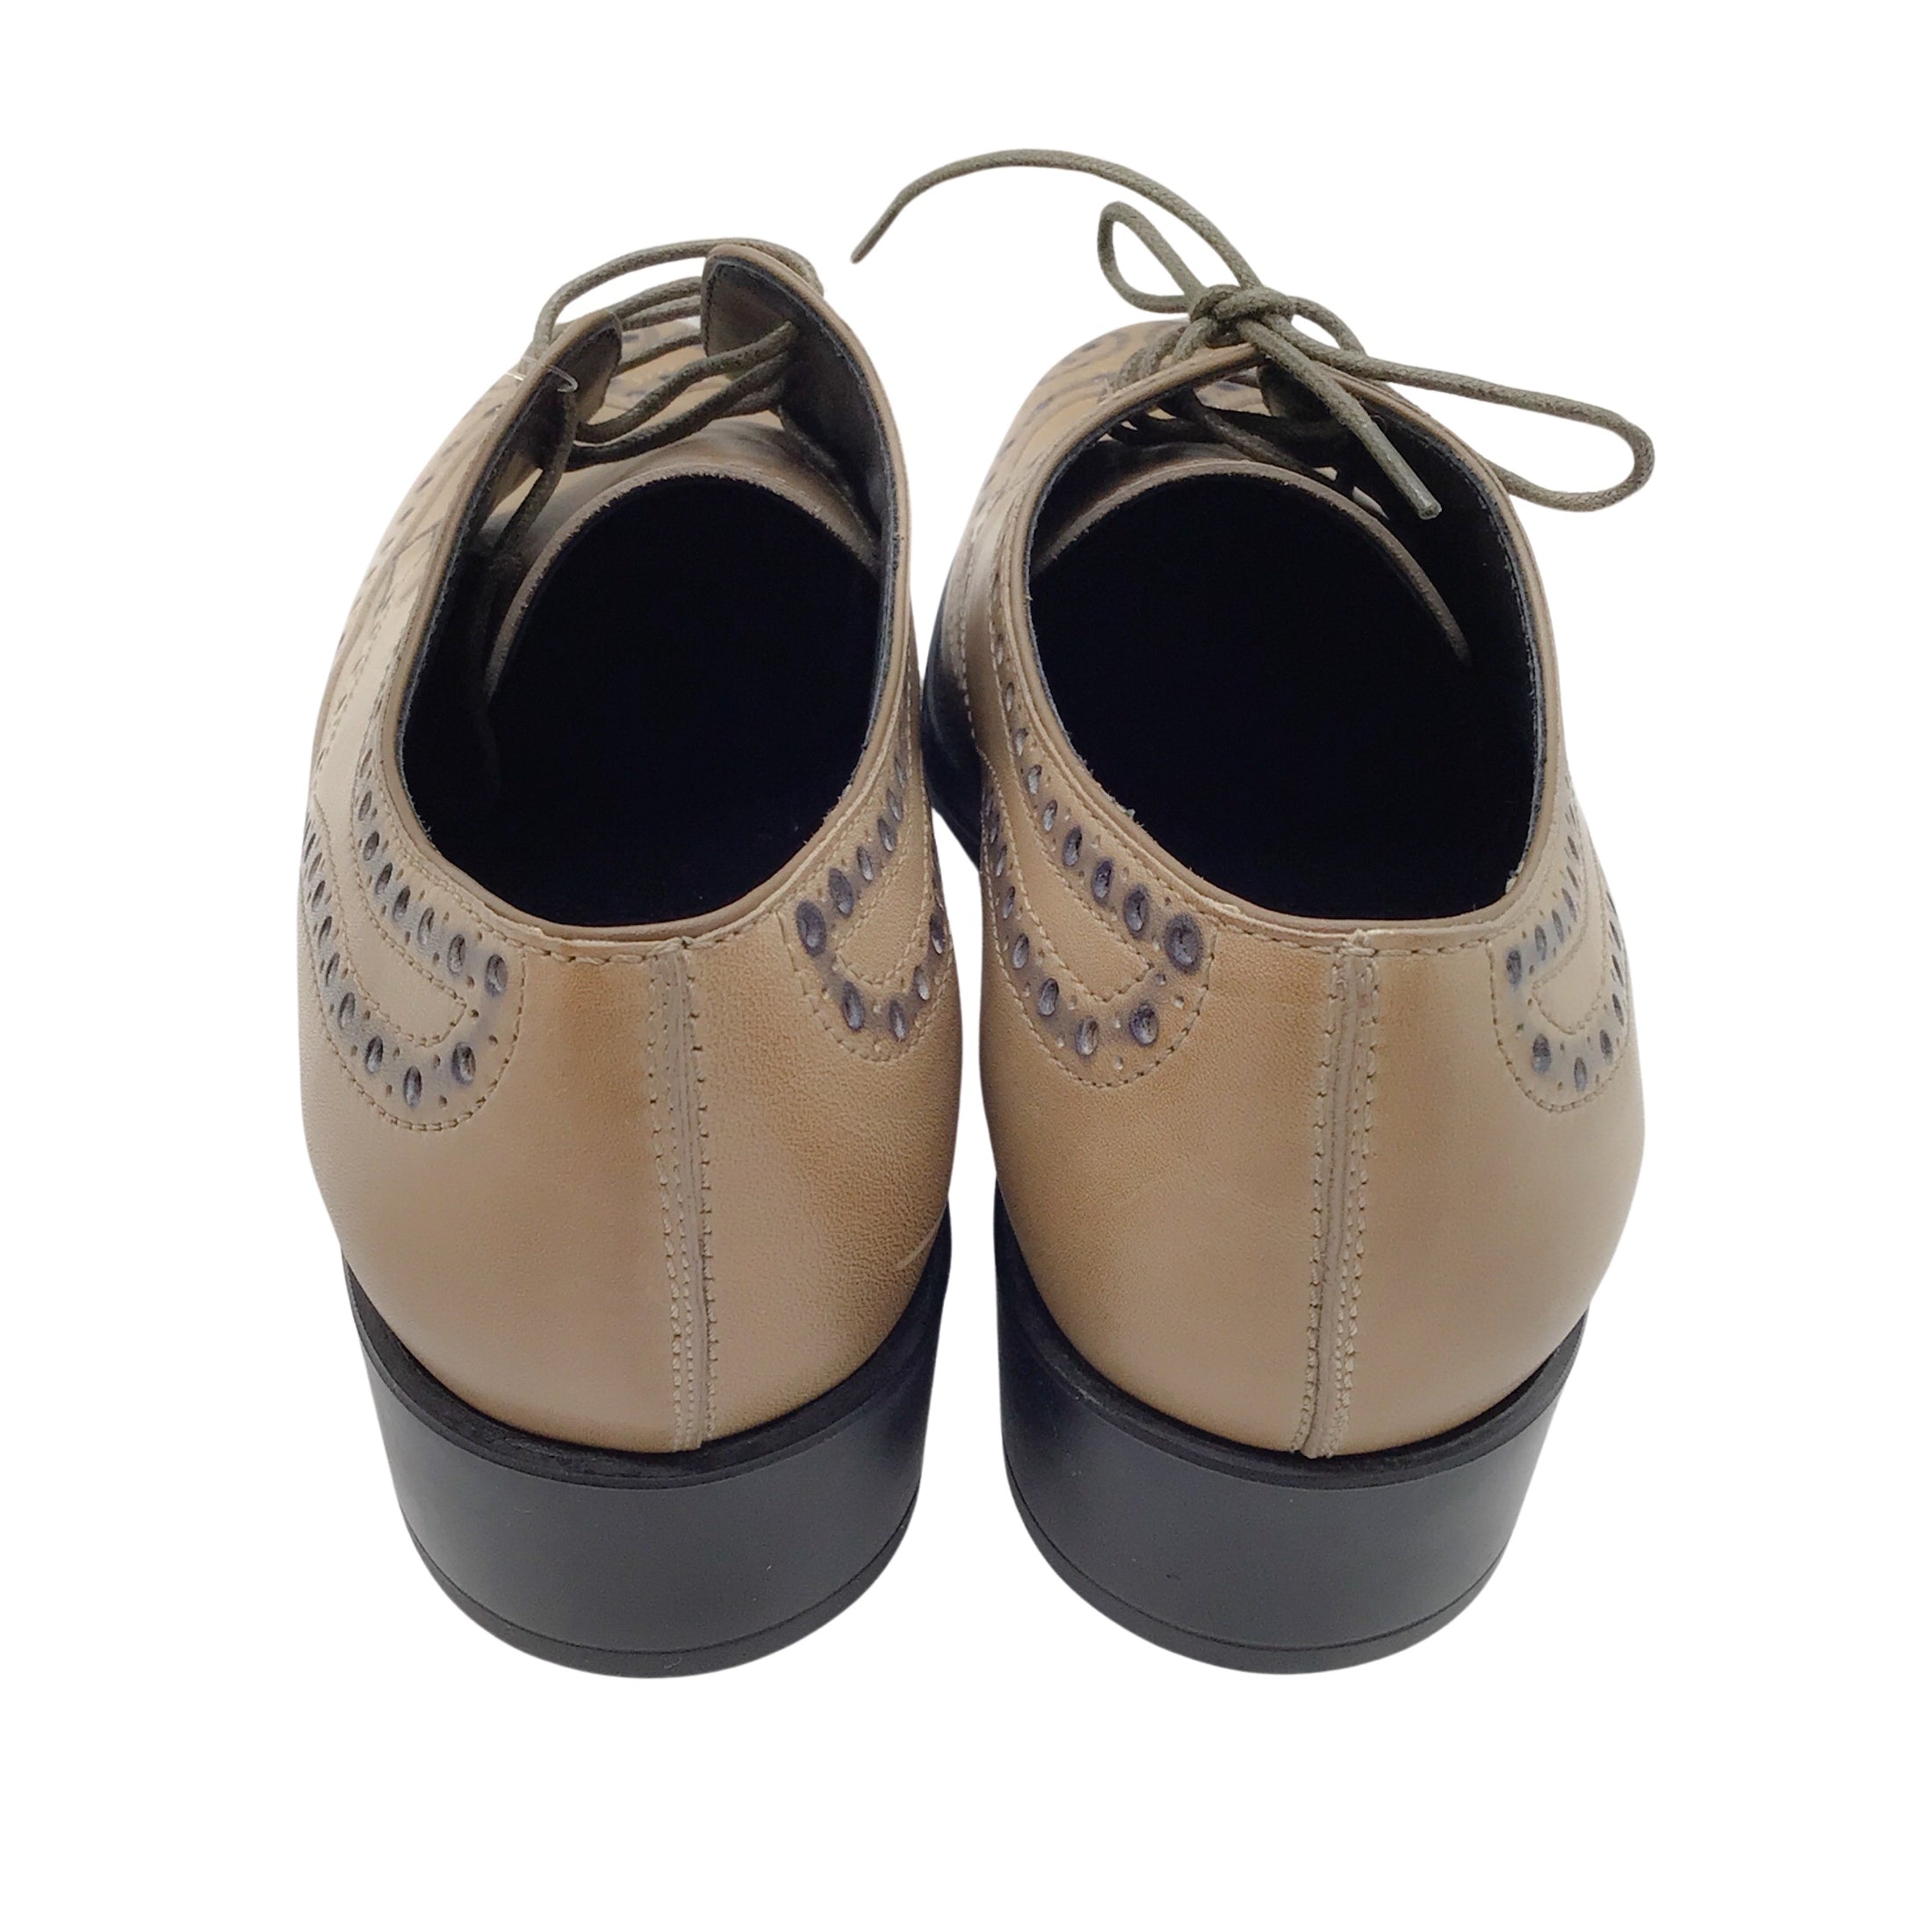 Tod's Taupe Leather Lace-Up Oxford Shoes